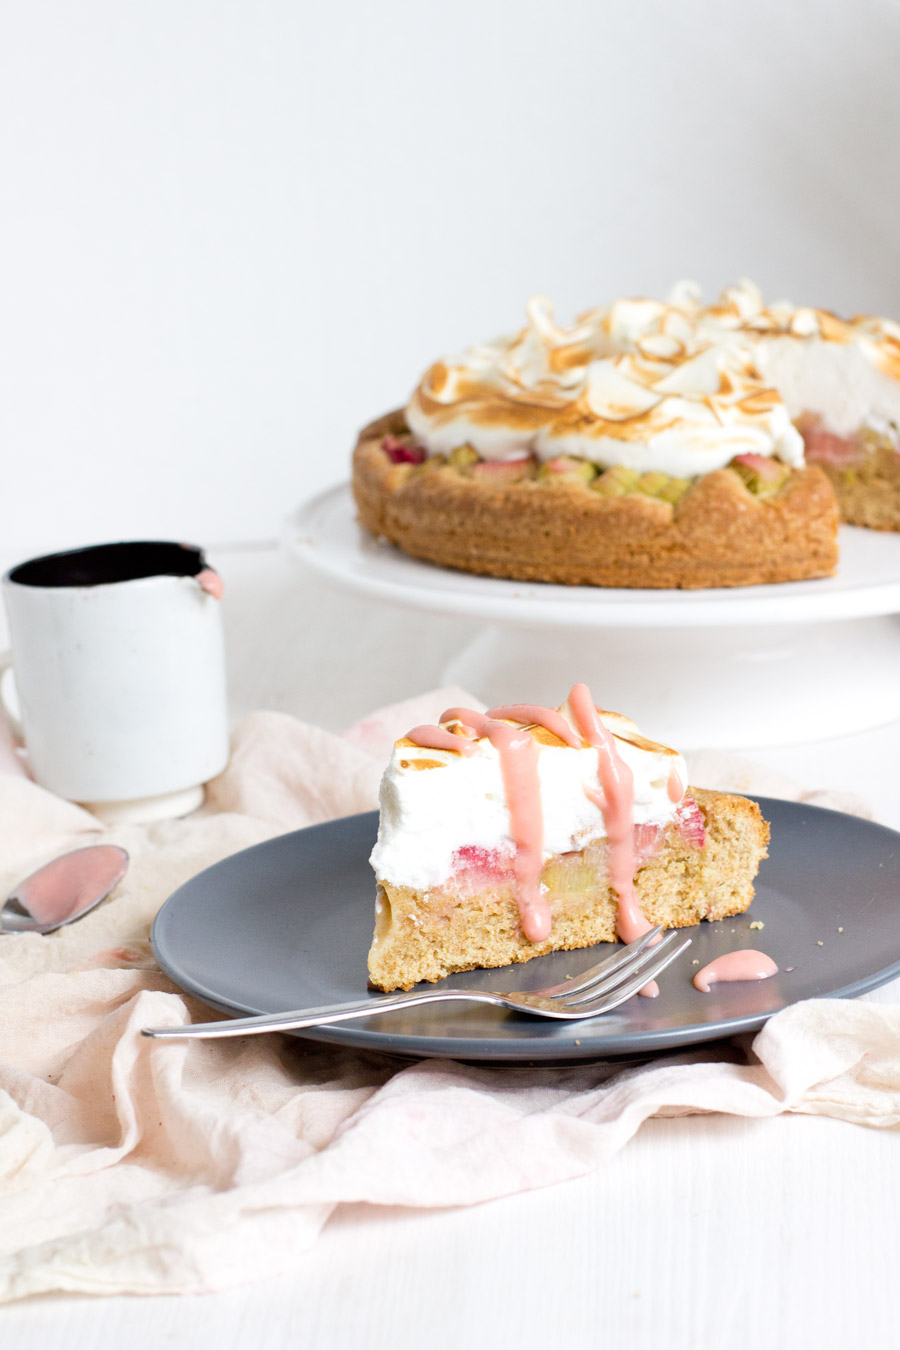 whole grain rhubarb cake with honey meringue - perfect for every summer garden party!